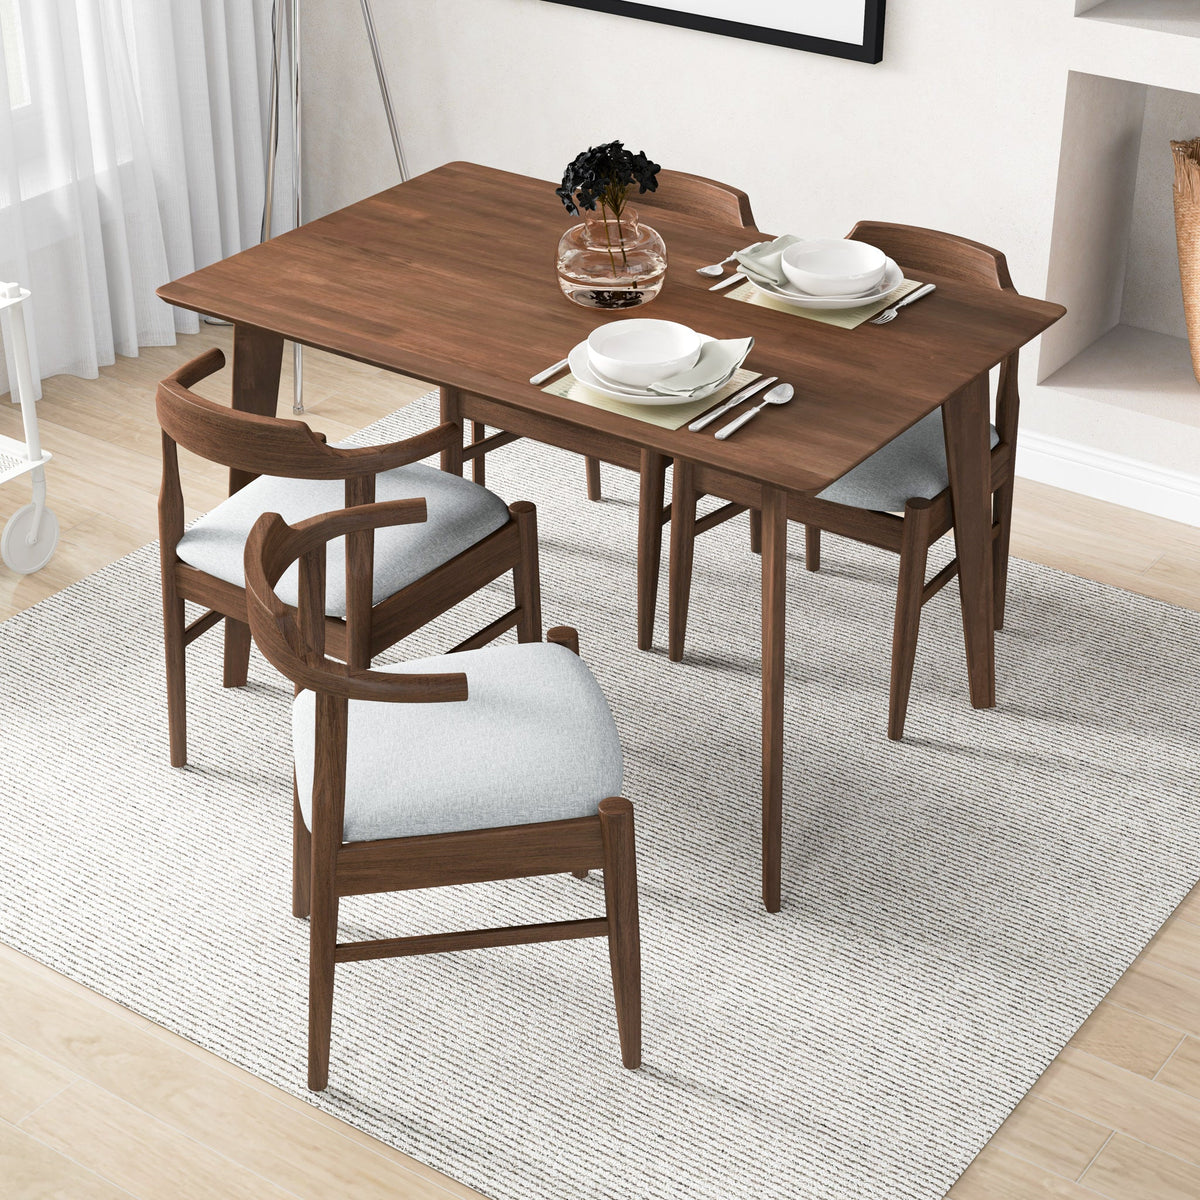 Dining Set, Abbott Small Walnut Table with 4 Zola Gray Chairs | Mid in Mod | Houston TX | Best Furniture stores in Houston